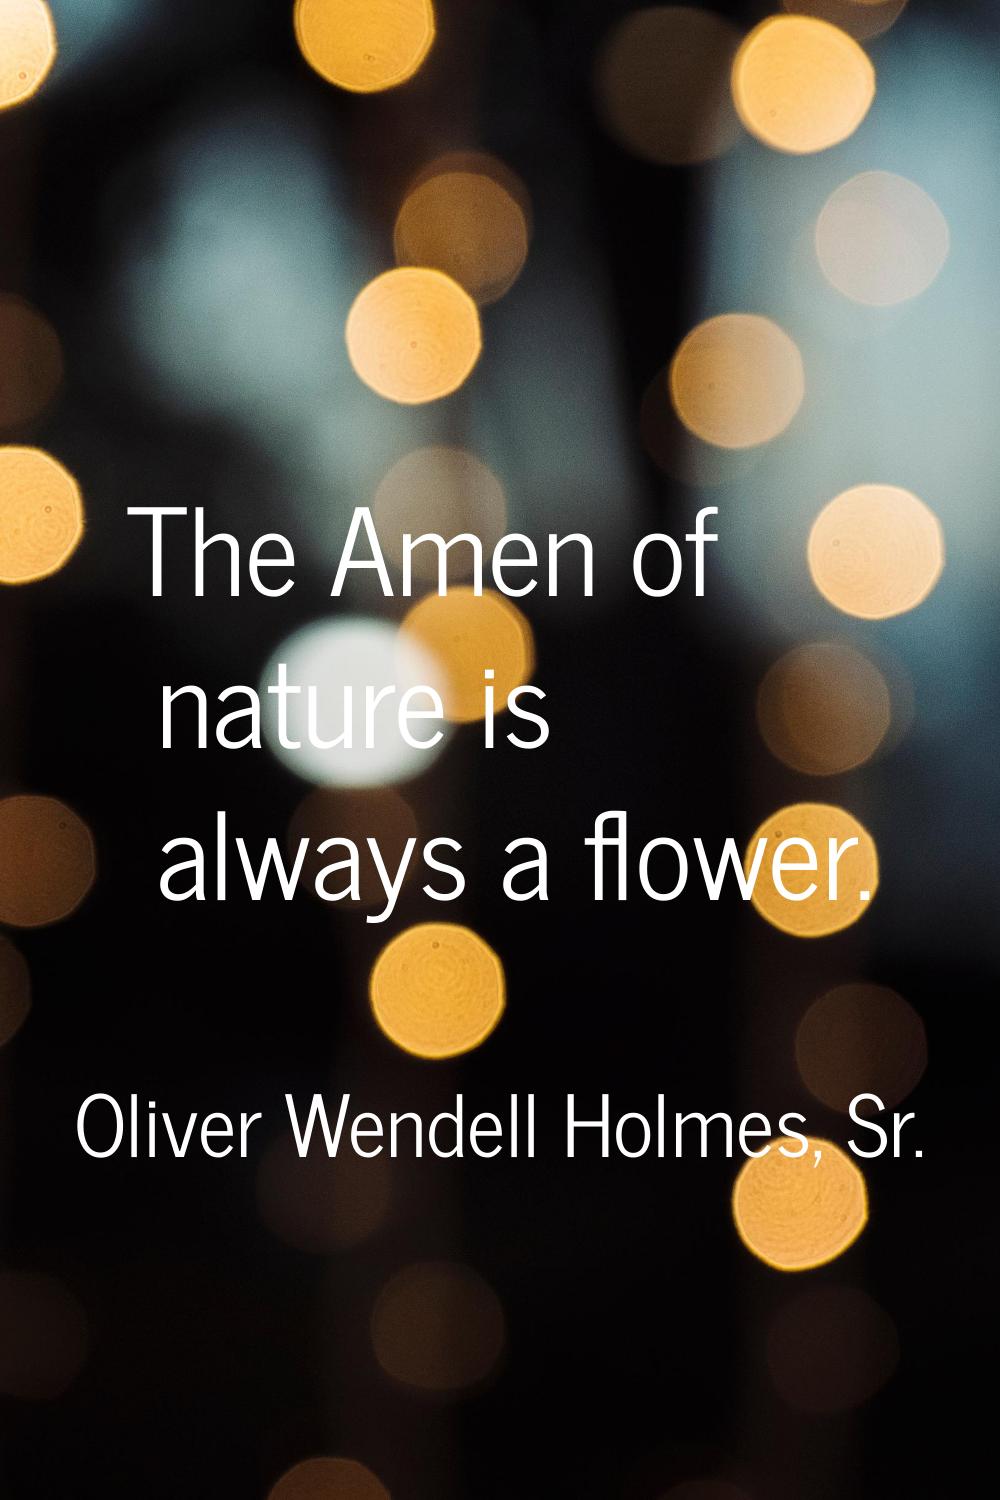 The Amen of nature is always a flower.